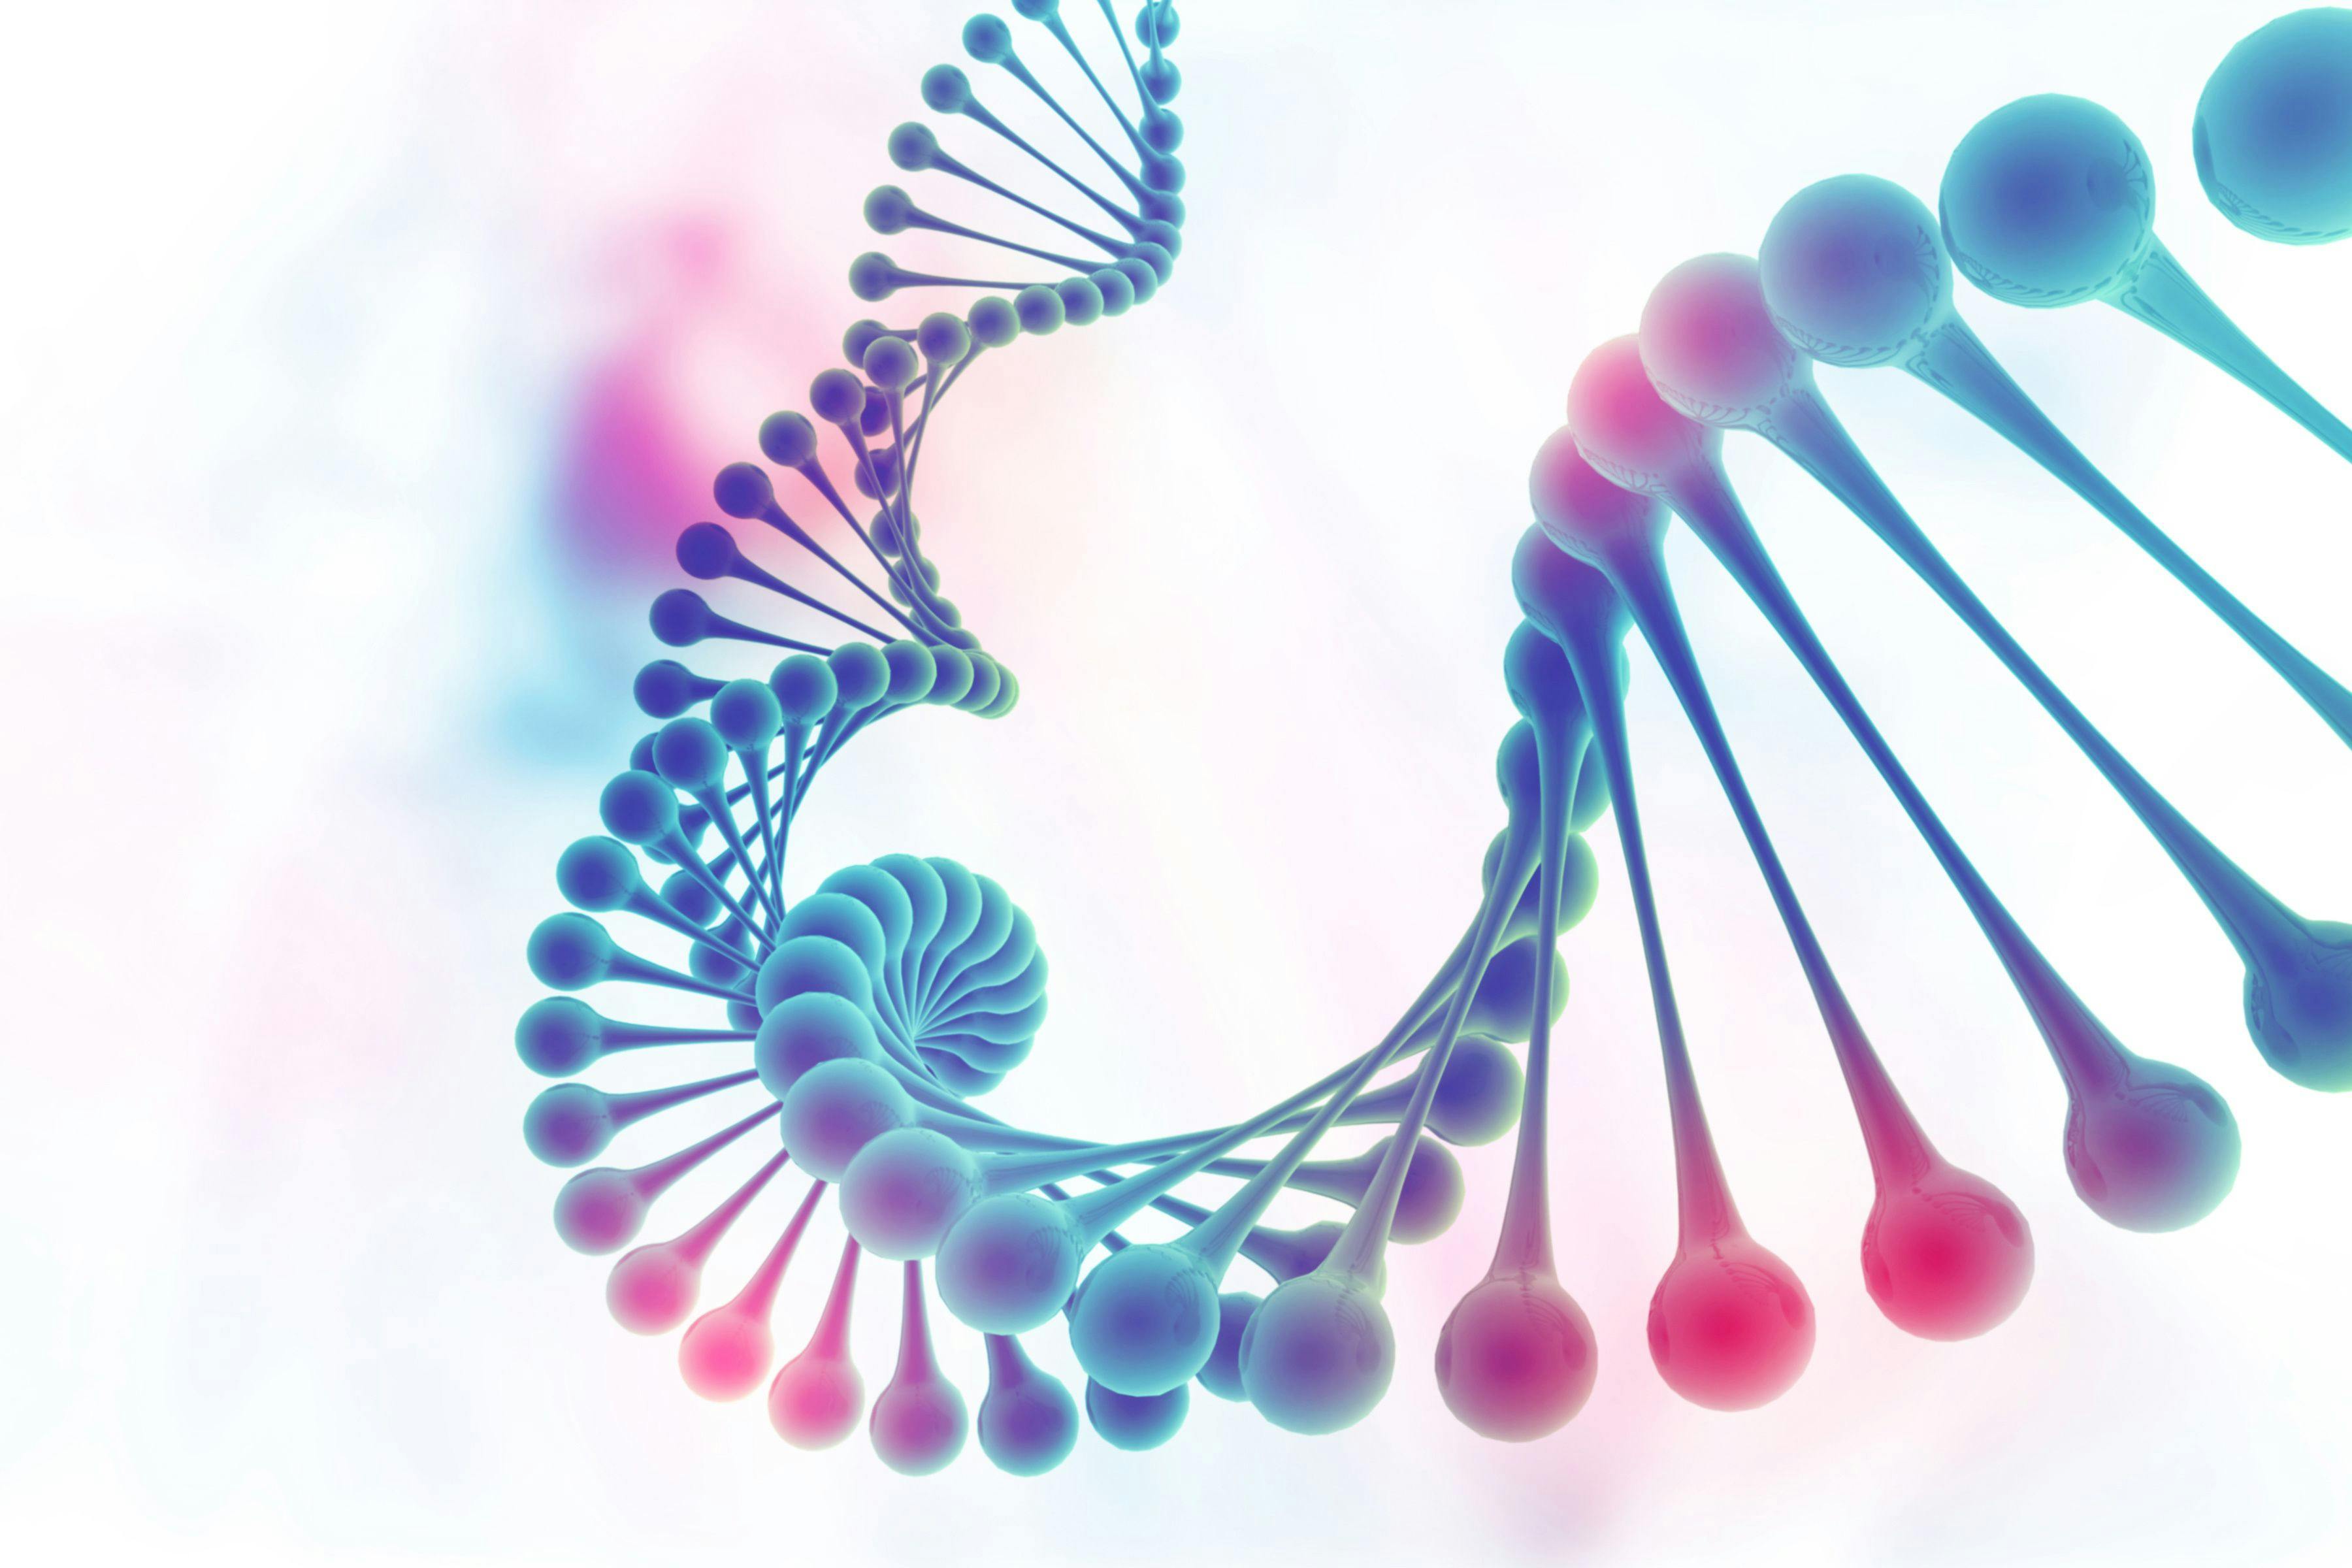 DNA structure on science background | Image Credit: © Crystal light - www.stock.adobe.com